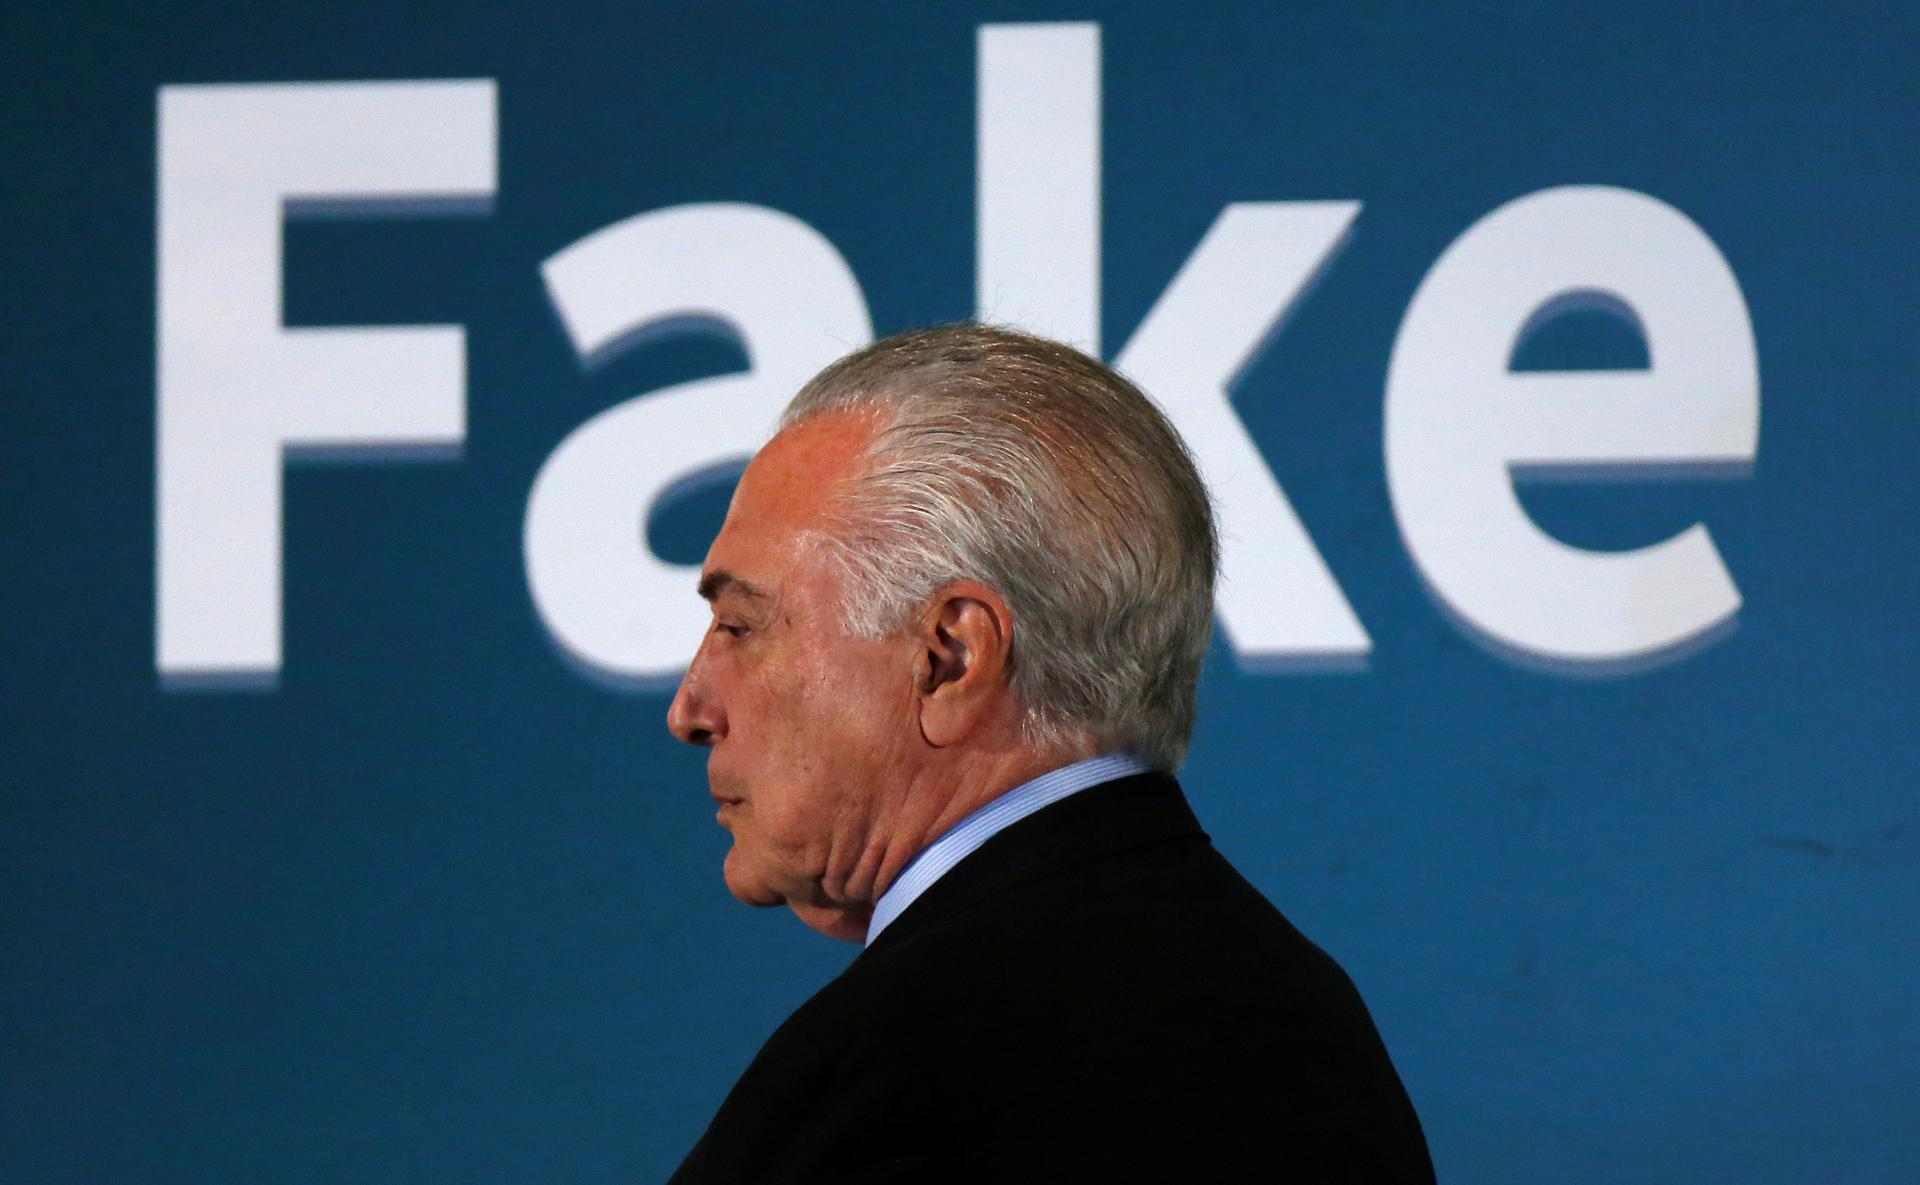 Brazil's President Michel Temer with "FAKE" spelled out behind his head 